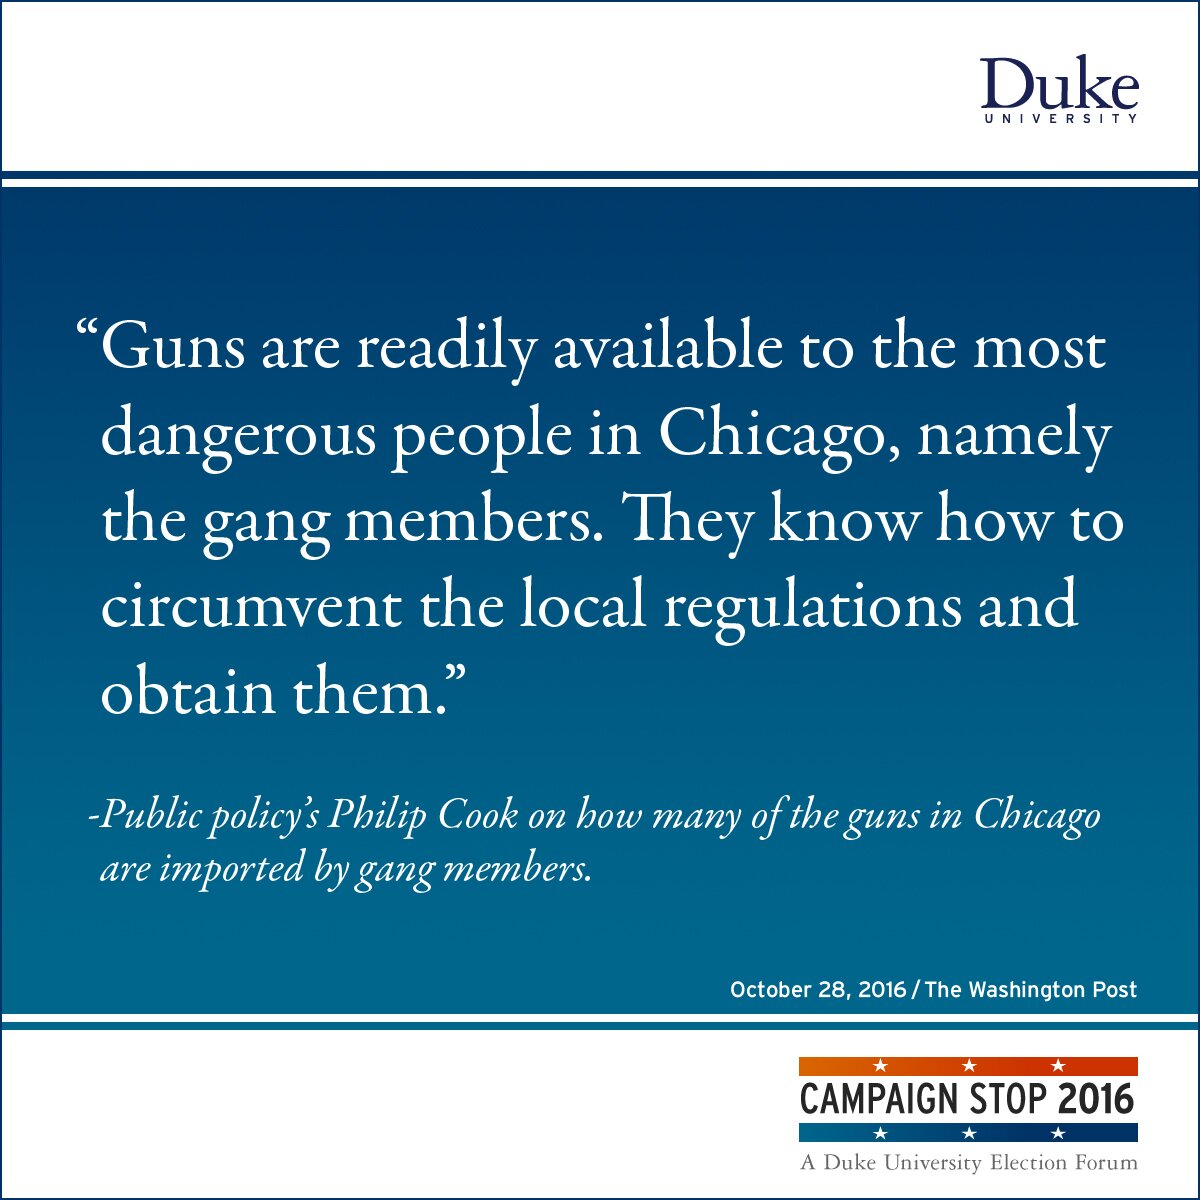 “Guns are readily available to the most dangerous people in Chicago, namely the gang members. They know how to circumvent the local regulations and obtain them.” -Public policy’s Philip Cook on how many of the guns in Chicago are imported by gang members.